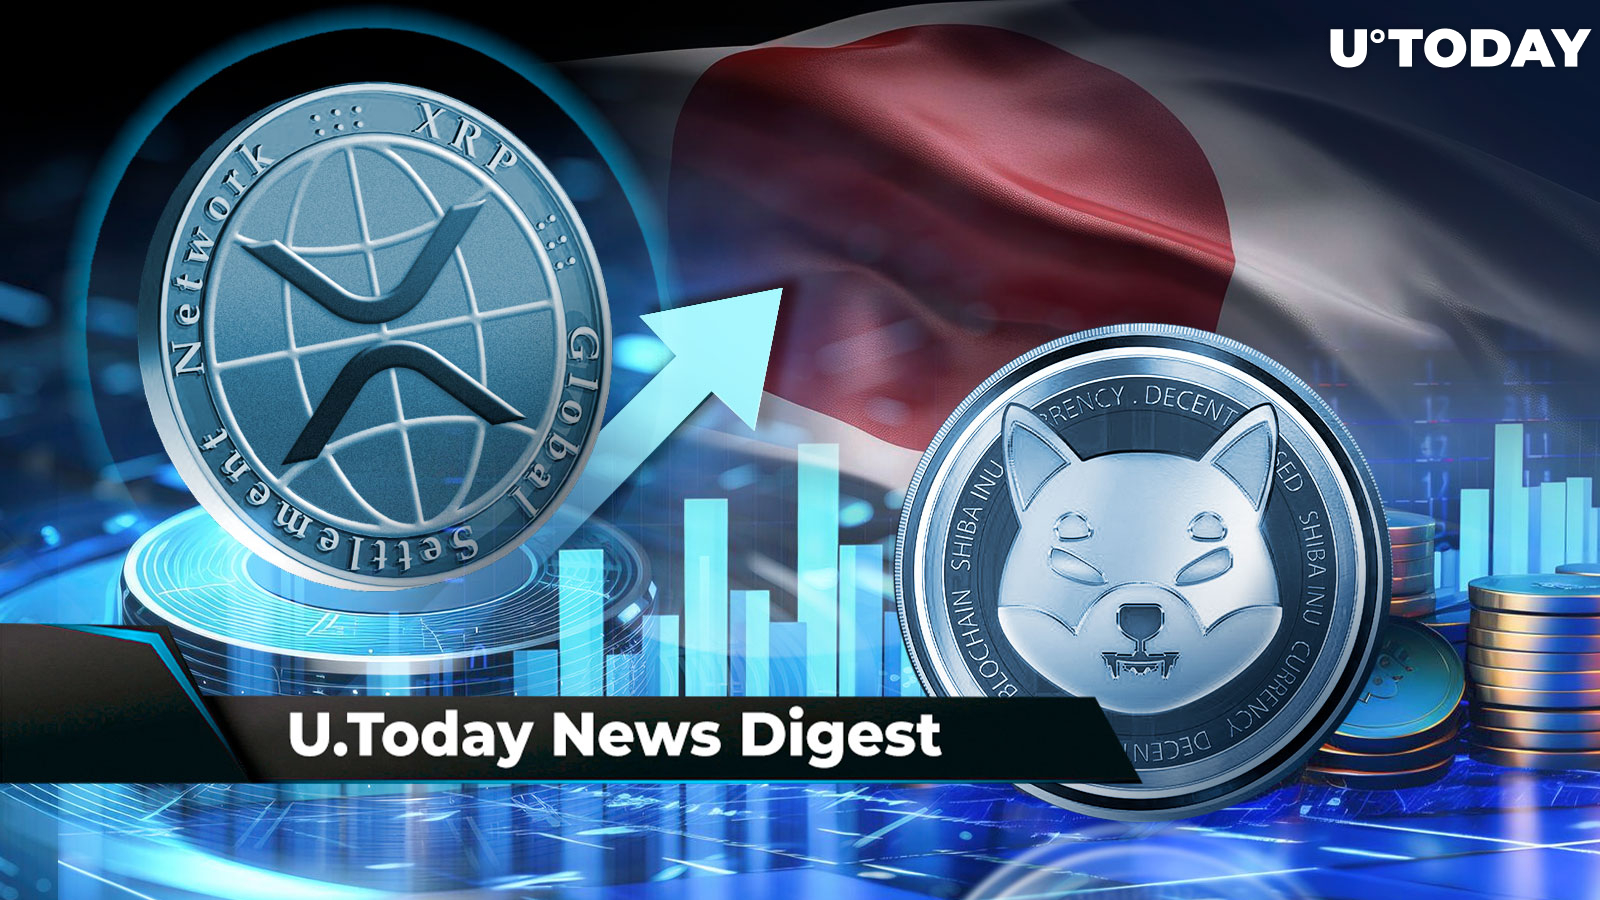 XRP Price Suddenly Jumps, SHIB Listed by Japanese Crypto Exchange, Cardano Founder Addresses XRP Army's Ethereum Conspiracy: Crypto News Digest by U.Today